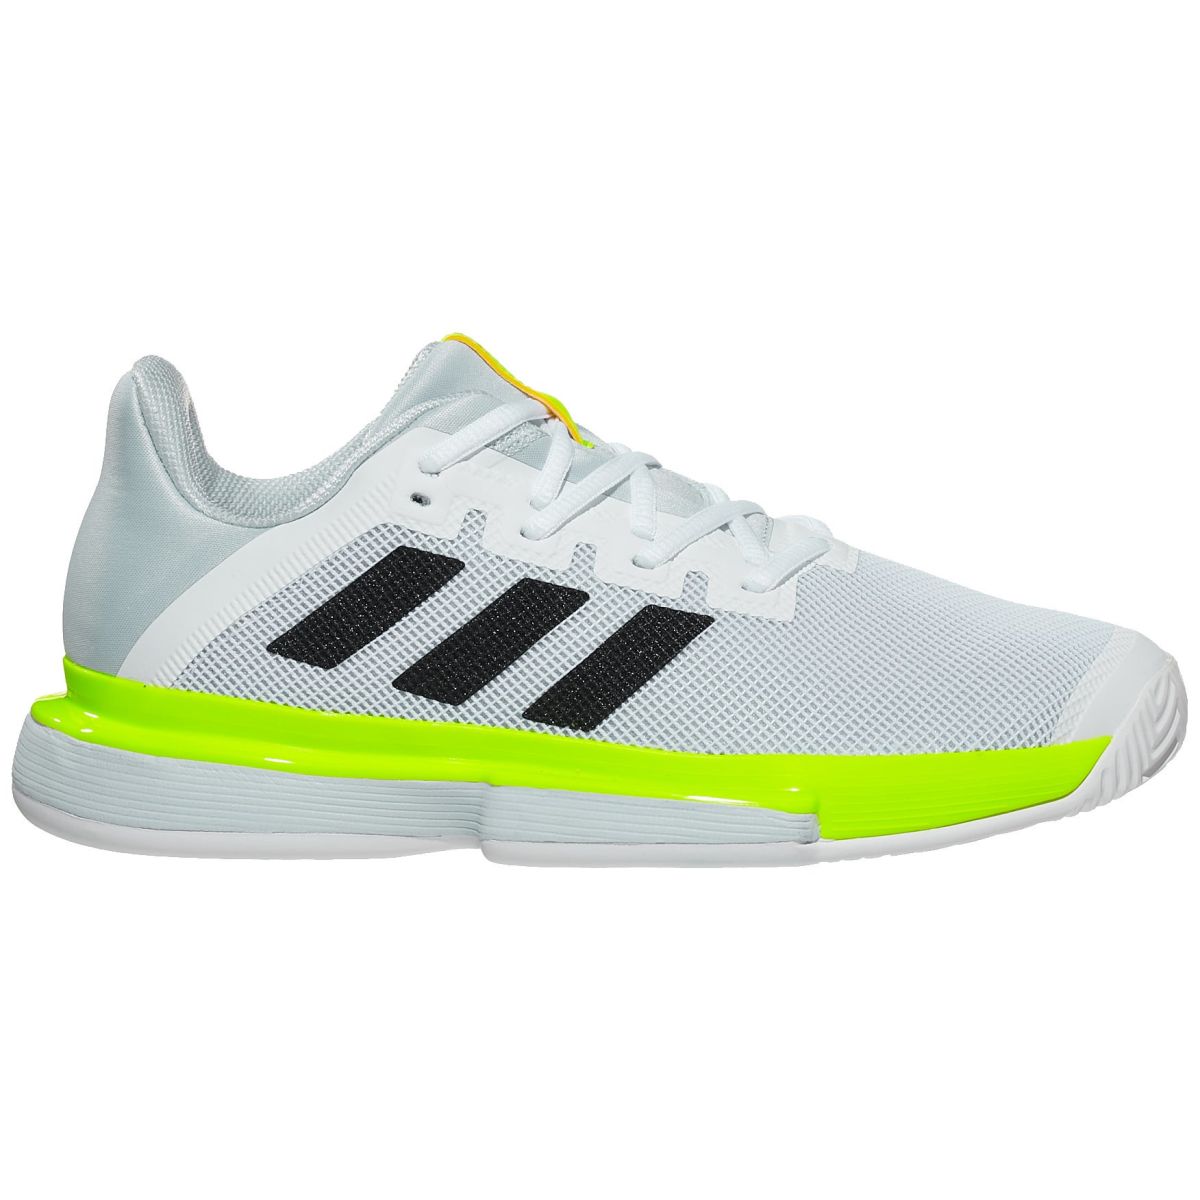 Adidas Solematch Bounce W Online, SAVE 37% - mpgc.net